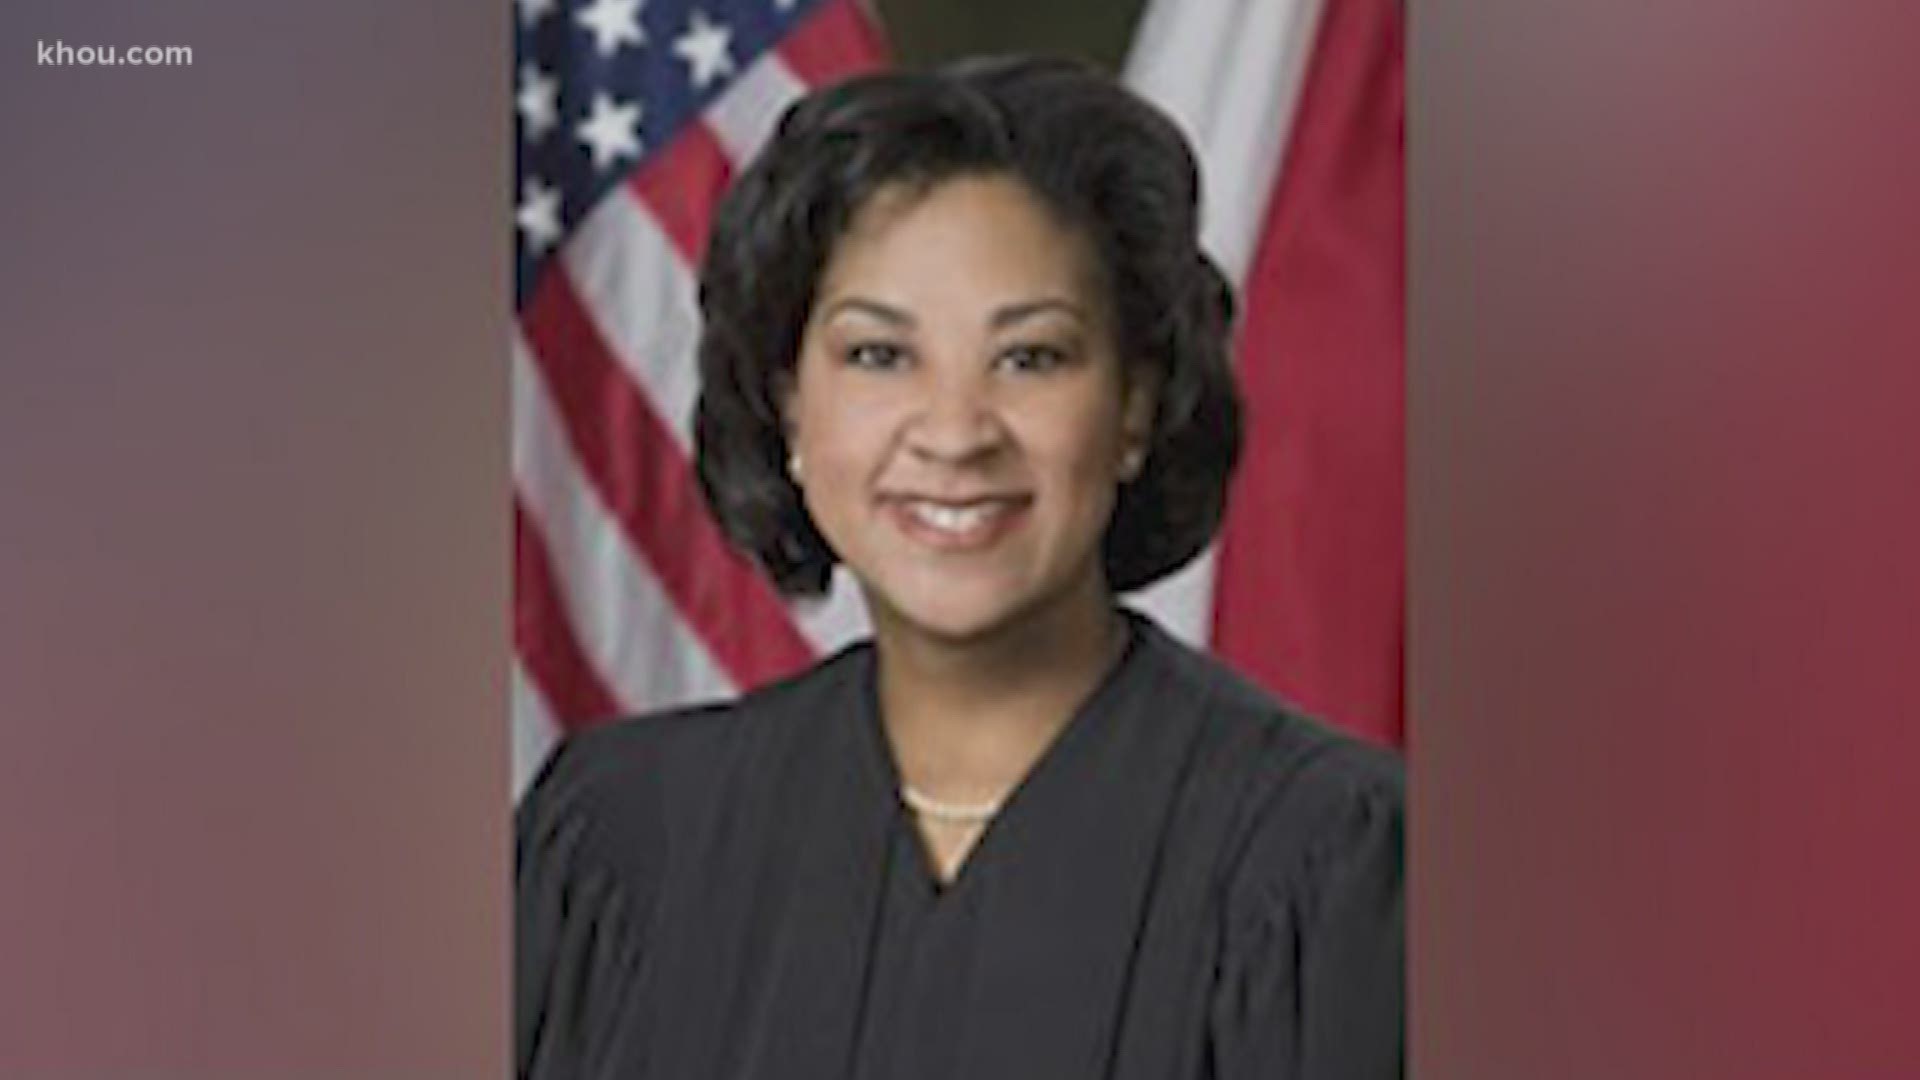 A judge serving her third term in Harris County has been indicted on allegations of wire fraud, the U.S. Attorney’s Office announced Friday morning.